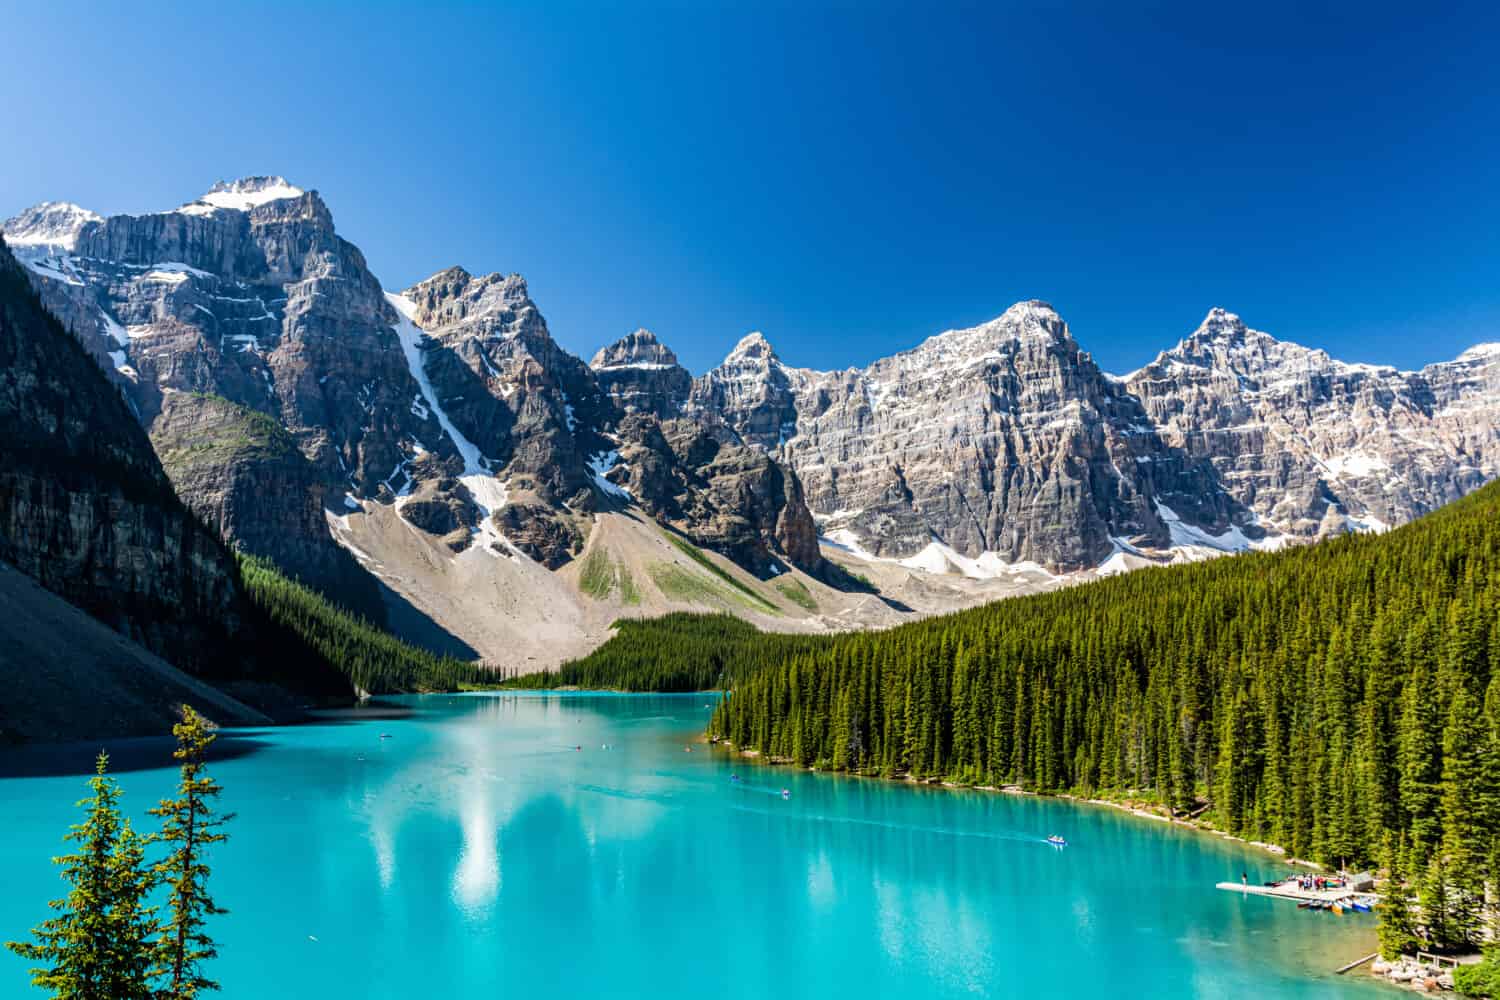 Amazing place to be on earth. Moraine lake, Banff National Park, Alberta, Canada